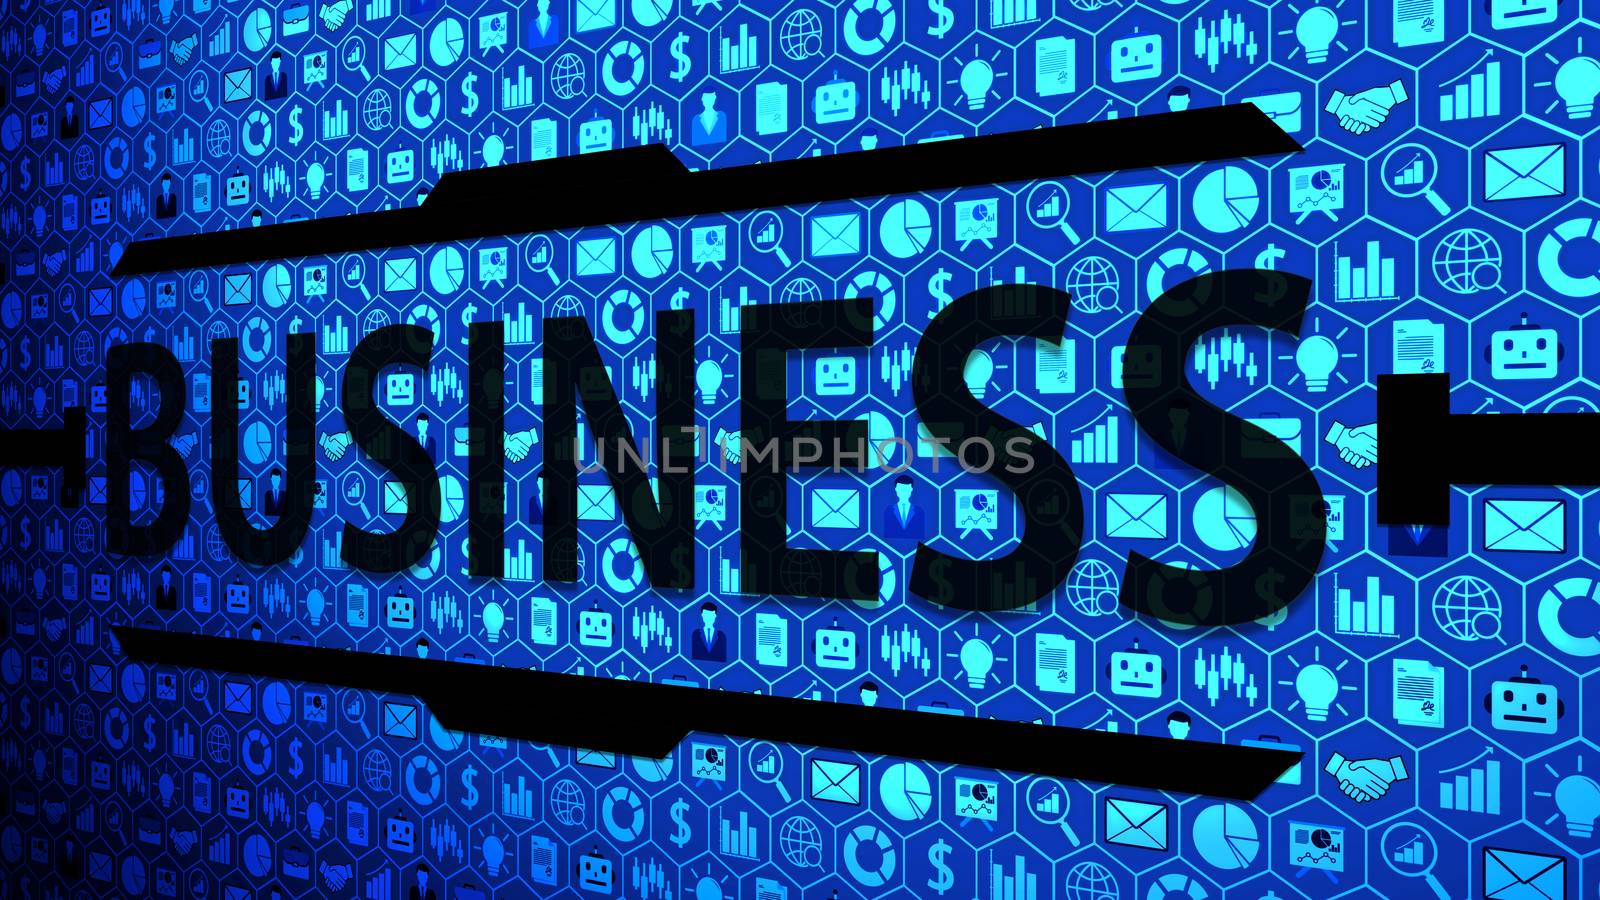 8K Business and Technology Big Picture Background Composed of Icons Set with Blue Light ver.3